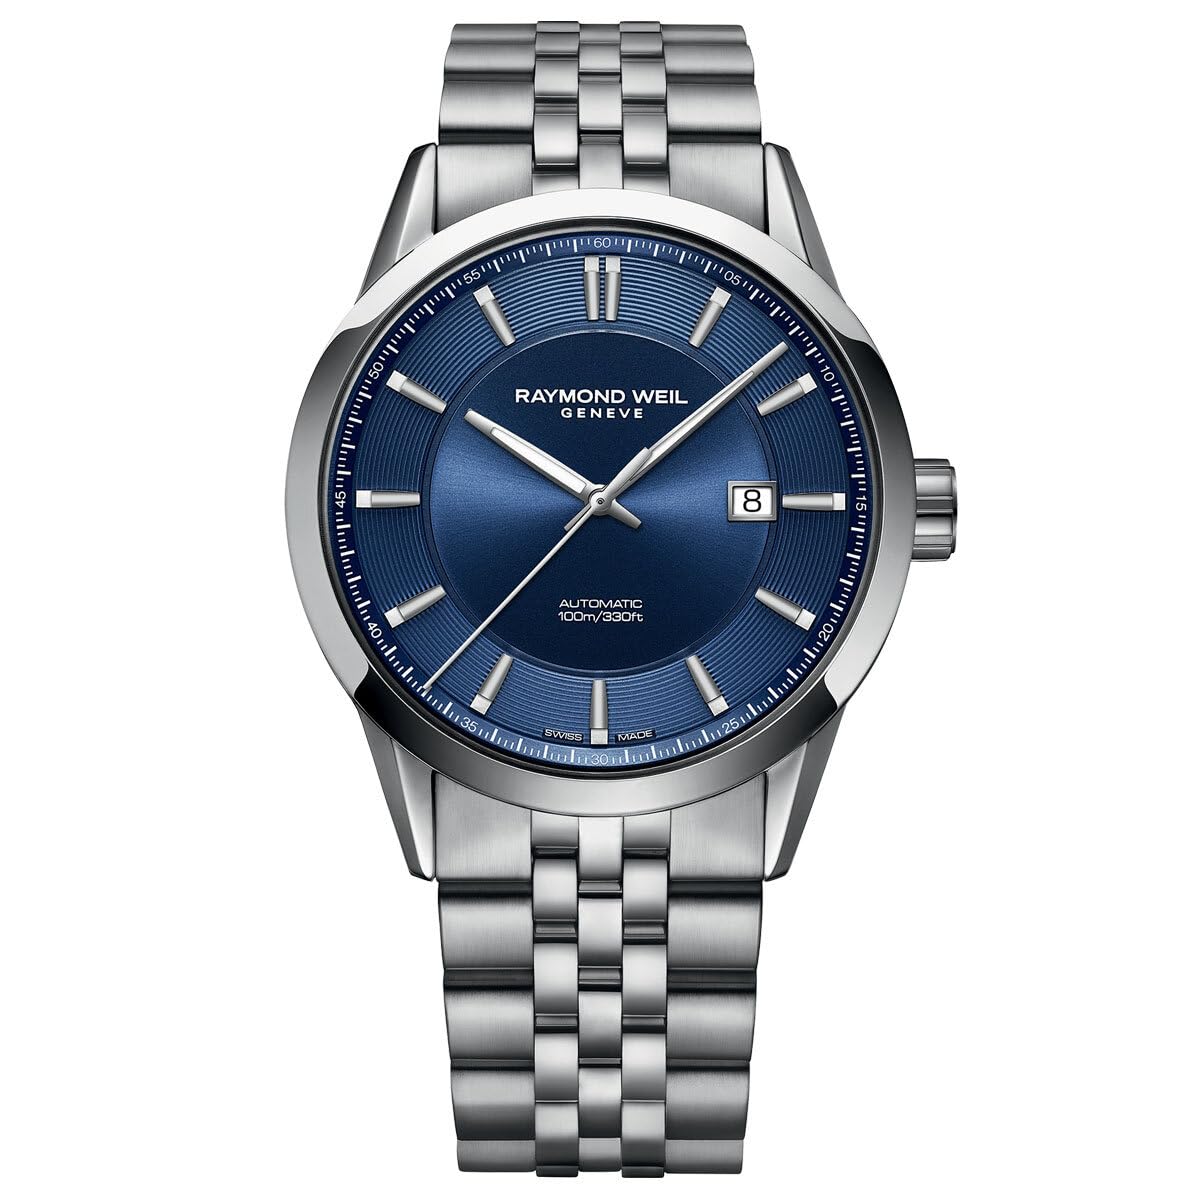 RAYMOND WEIL Freelancer Men's Automatic Watch, Blue Dial with Indexes, Stainless Steel Bracelet, 42 mm (Model: 2731-ST-50001)